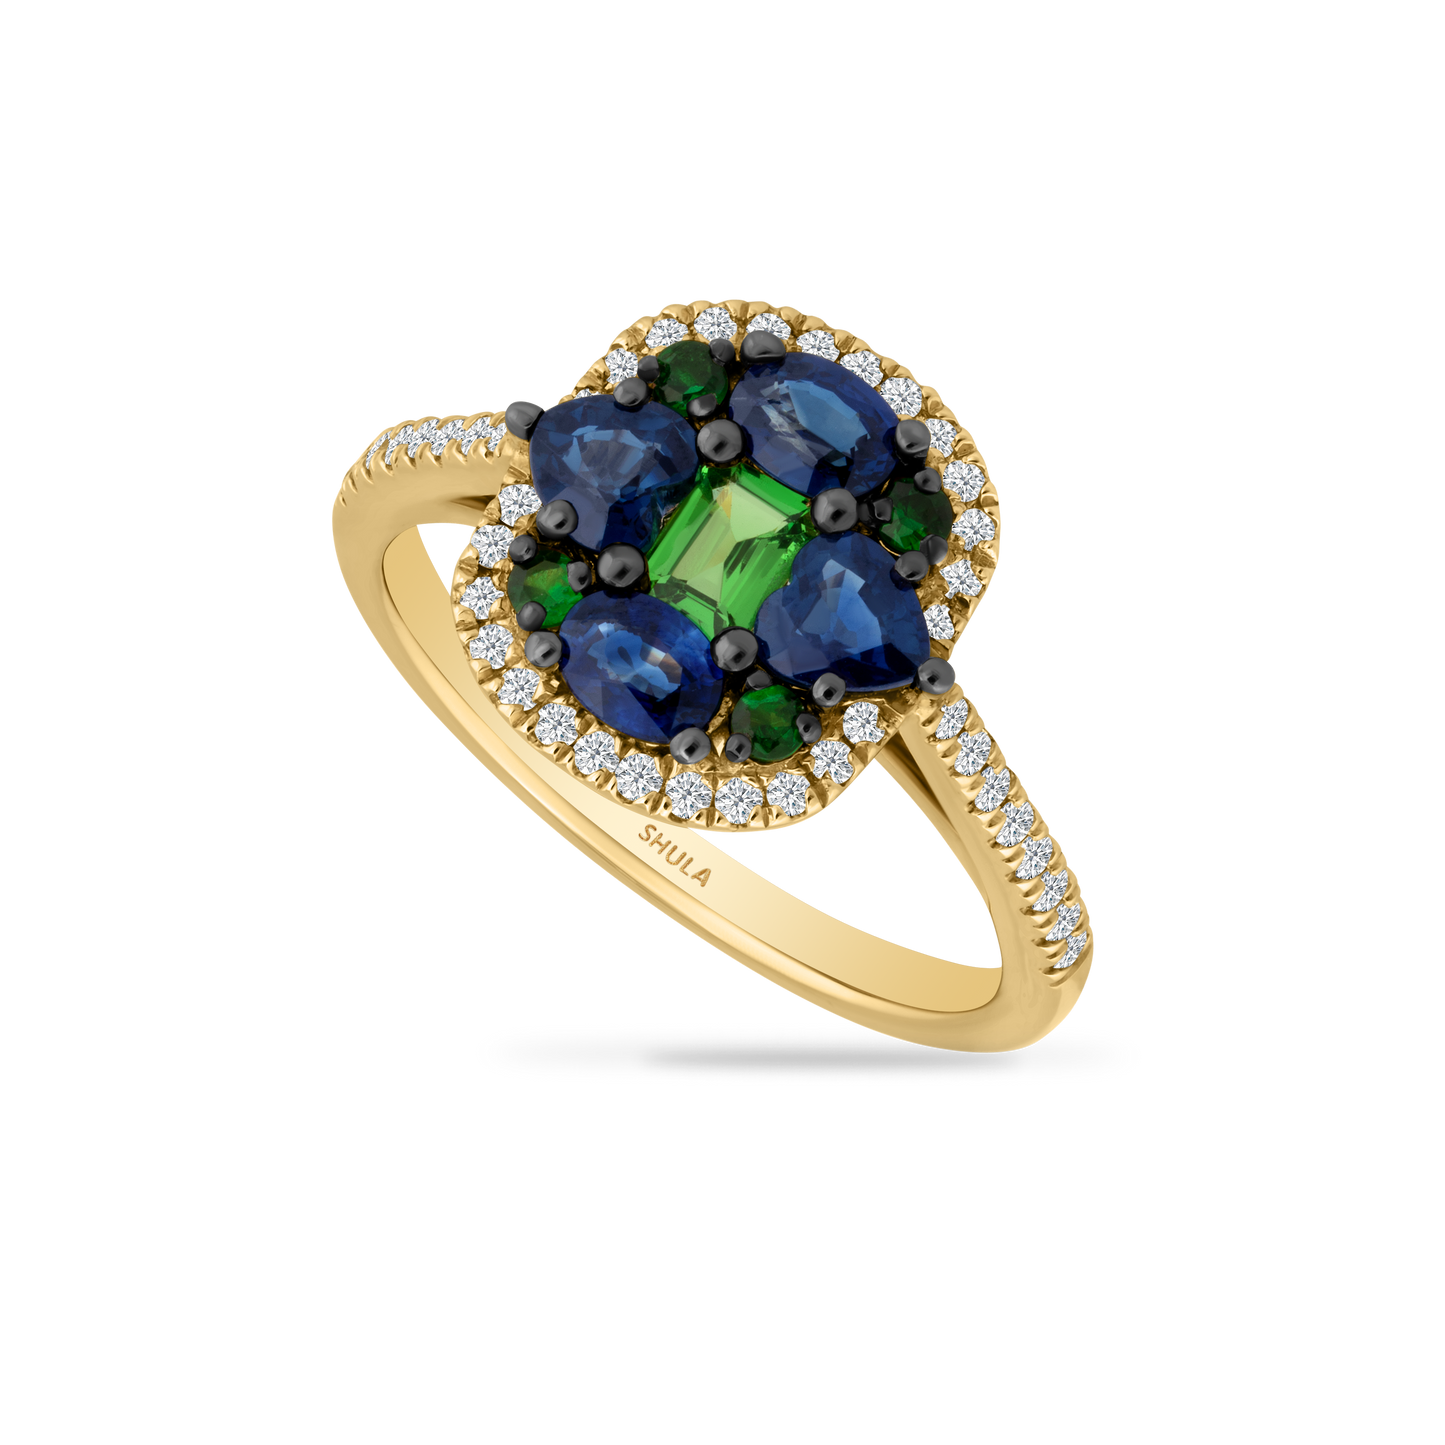 14K EMERALD SHAPED MULTI COLORED RING SET BLUE SAPPHIRES, DIAMONDS AND GARNETS